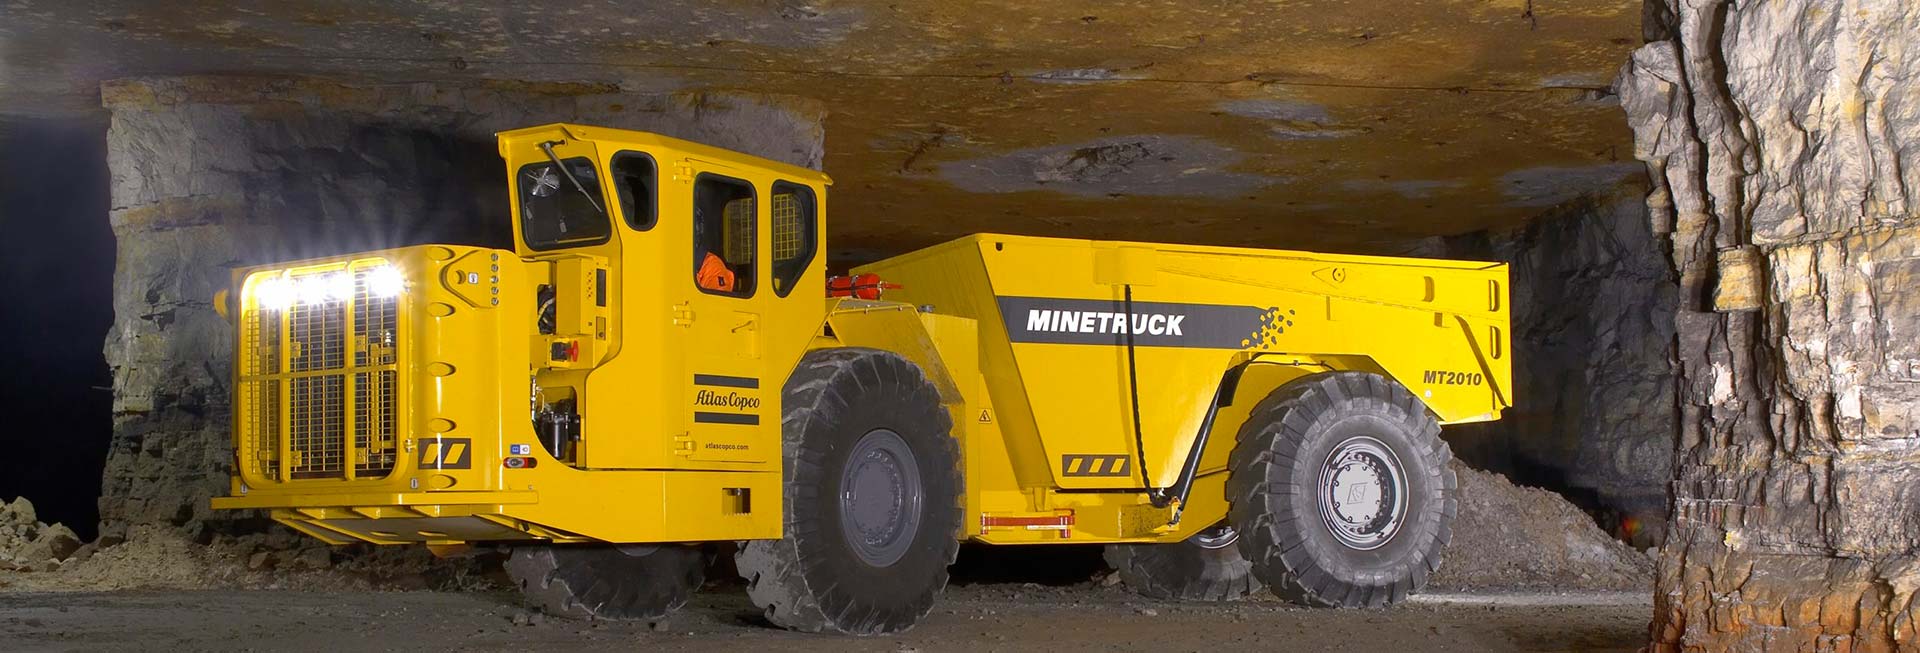 Heavy Equipment used for mining